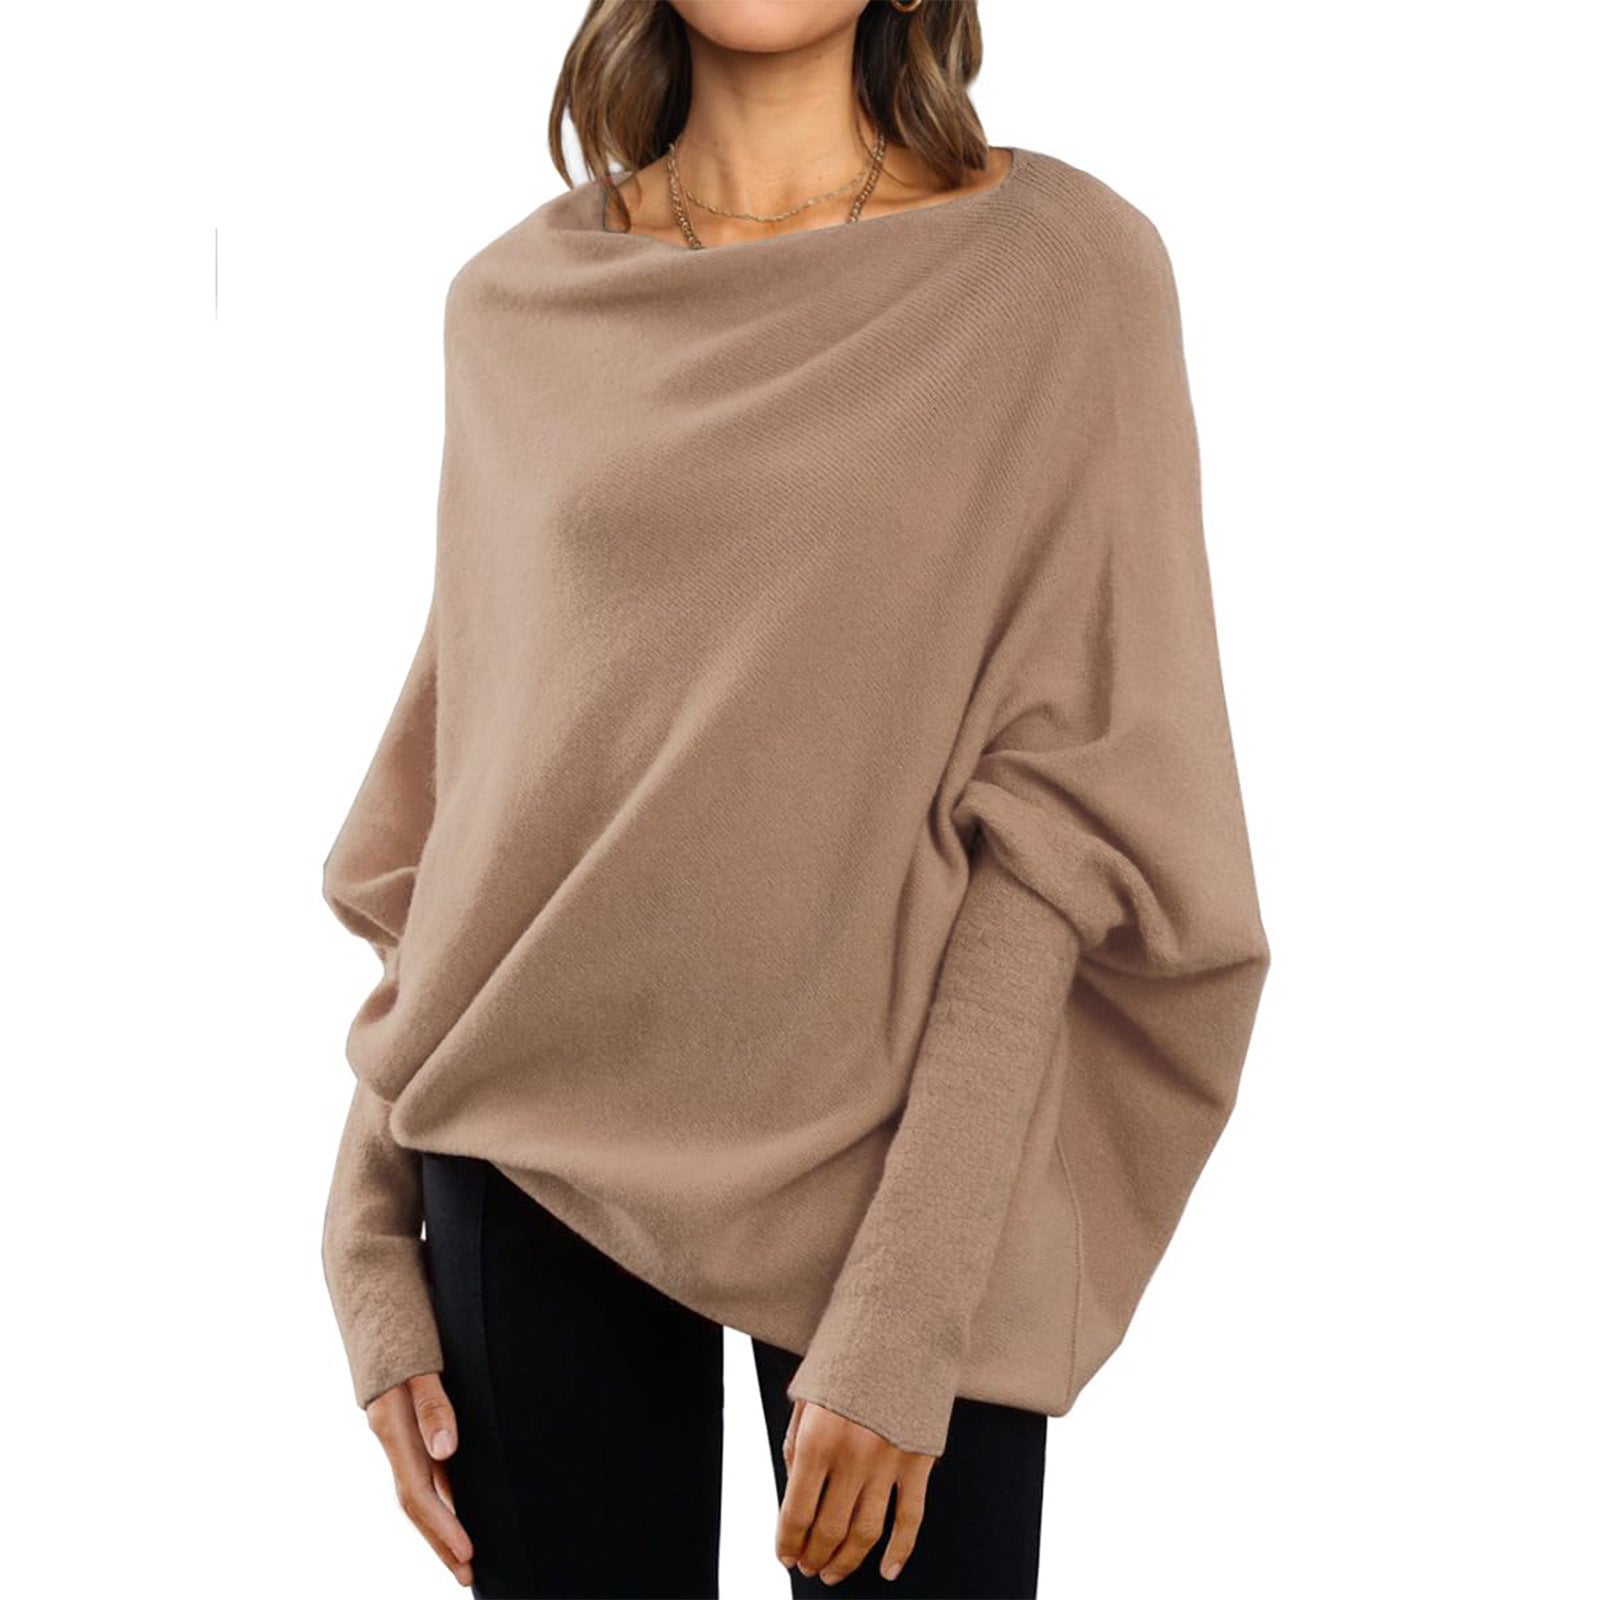 Women's Simple Fashion Solid Color Casual For Sweaters